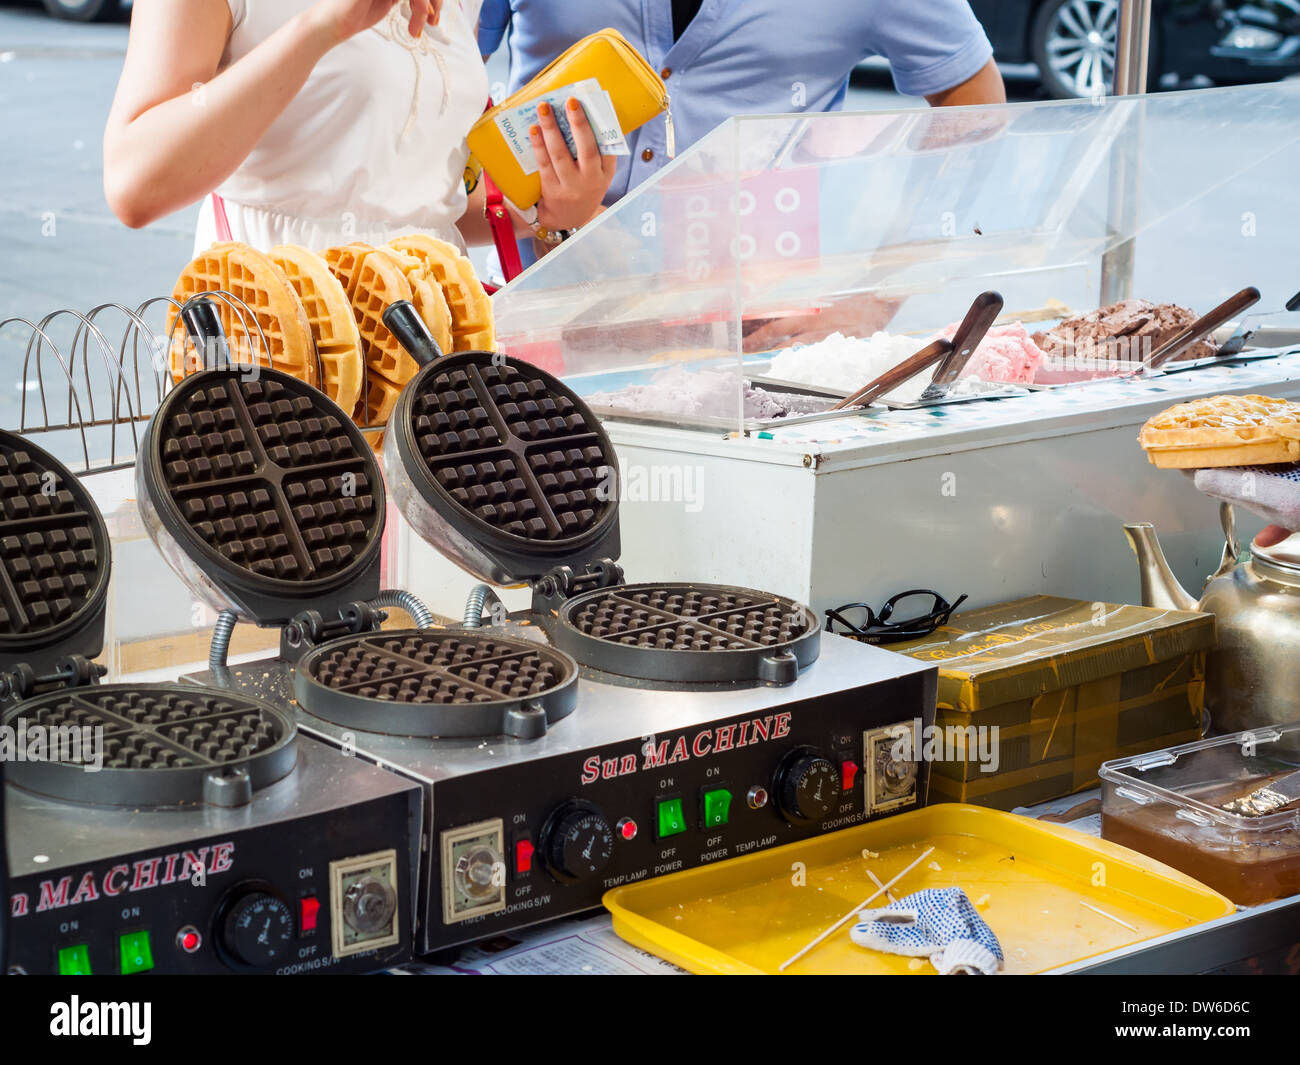 A street vendor in Insadong, Seoul, sells waffles and icecream. Stock Photo